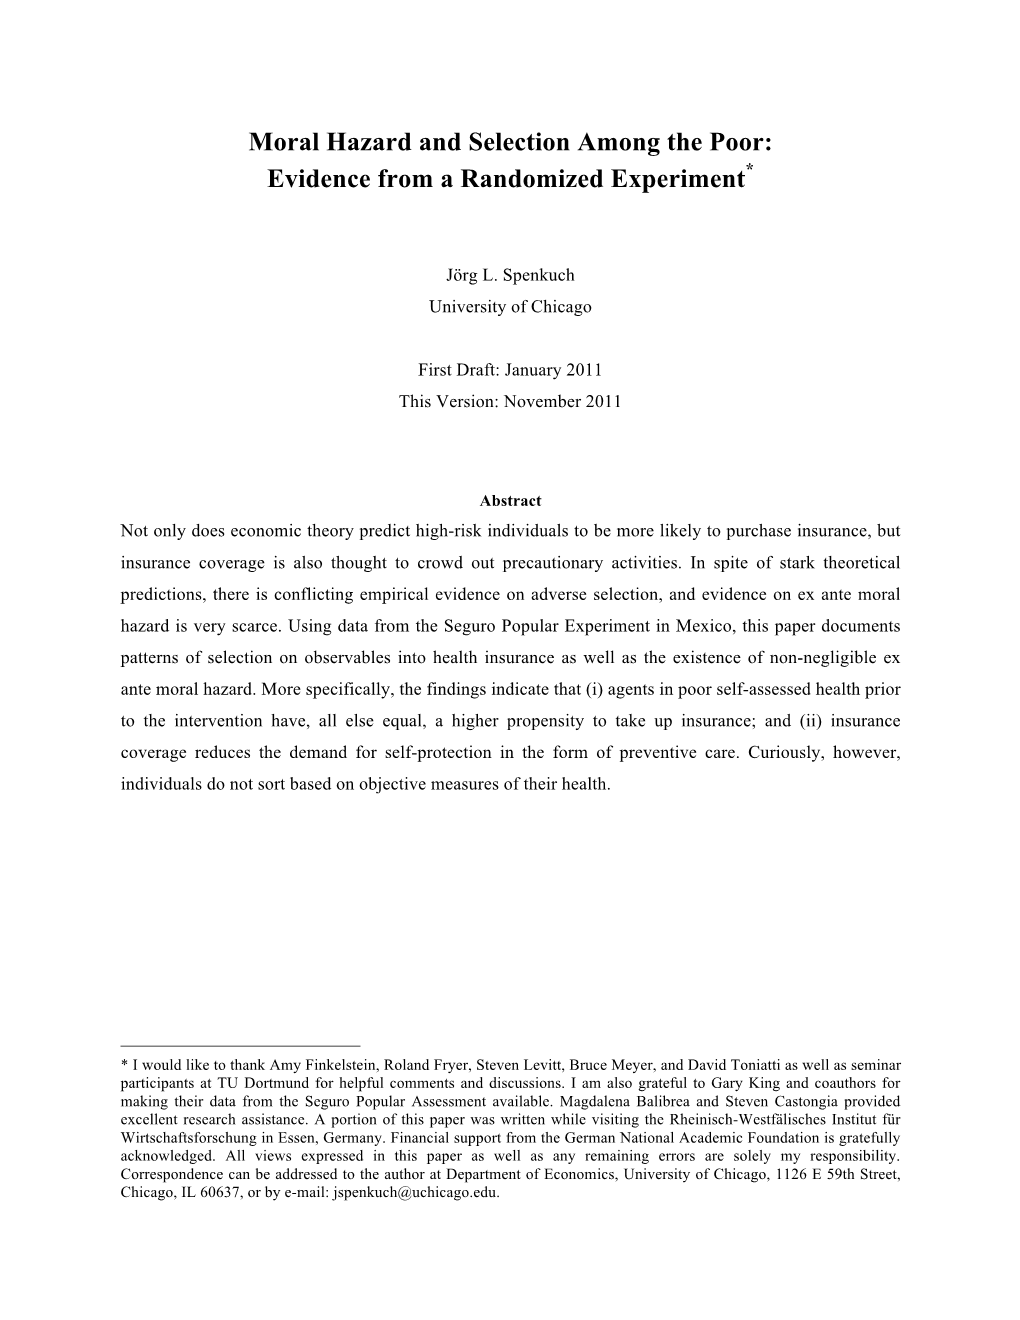 Moral Hazard and Selection Among the Poor: Evidence from a Randomized Experiment*